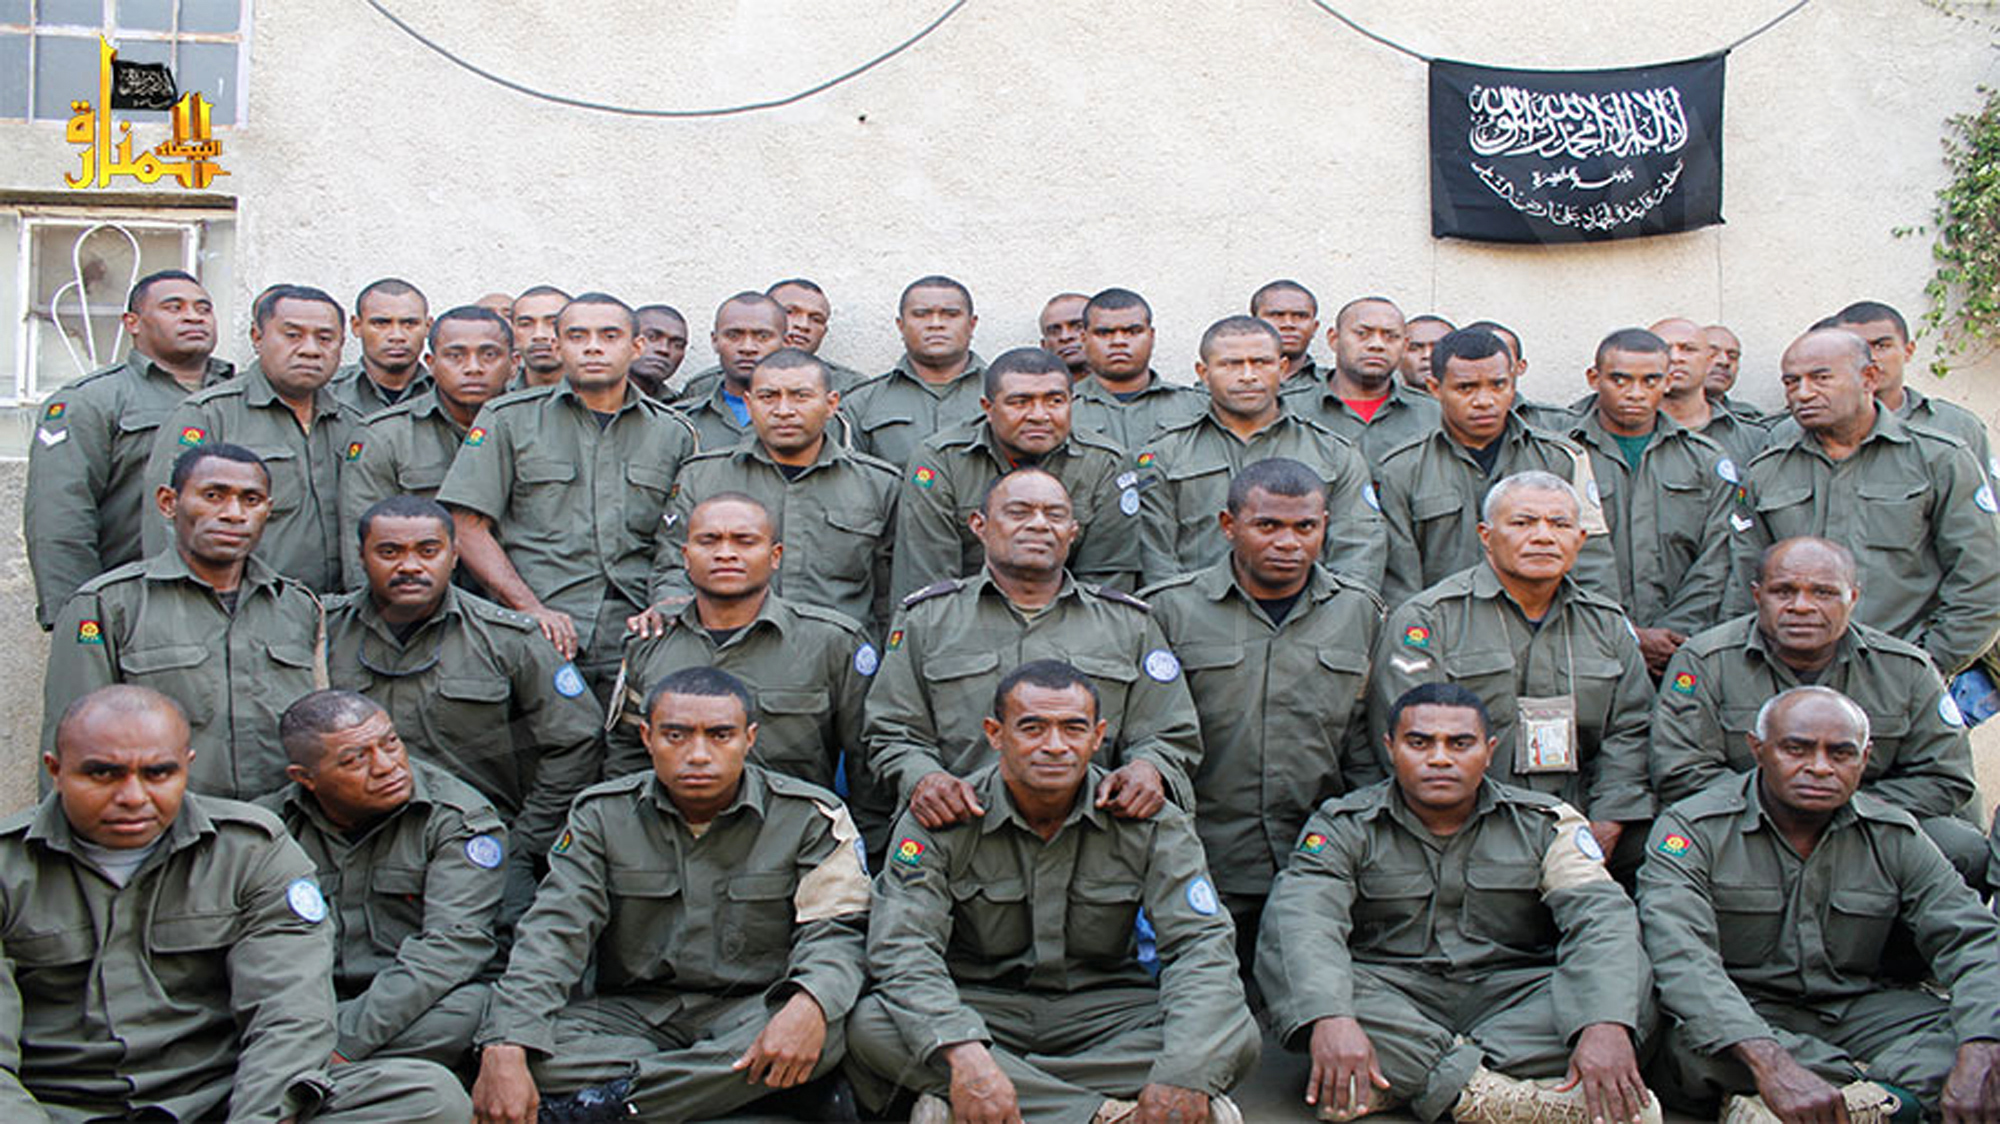 Undated photograph released by Hanin Network, a militant website, shows Fijian UN peacekeepers who were seized by The Nusra Front on Aug. 28, 2014, in the Golan Heights.